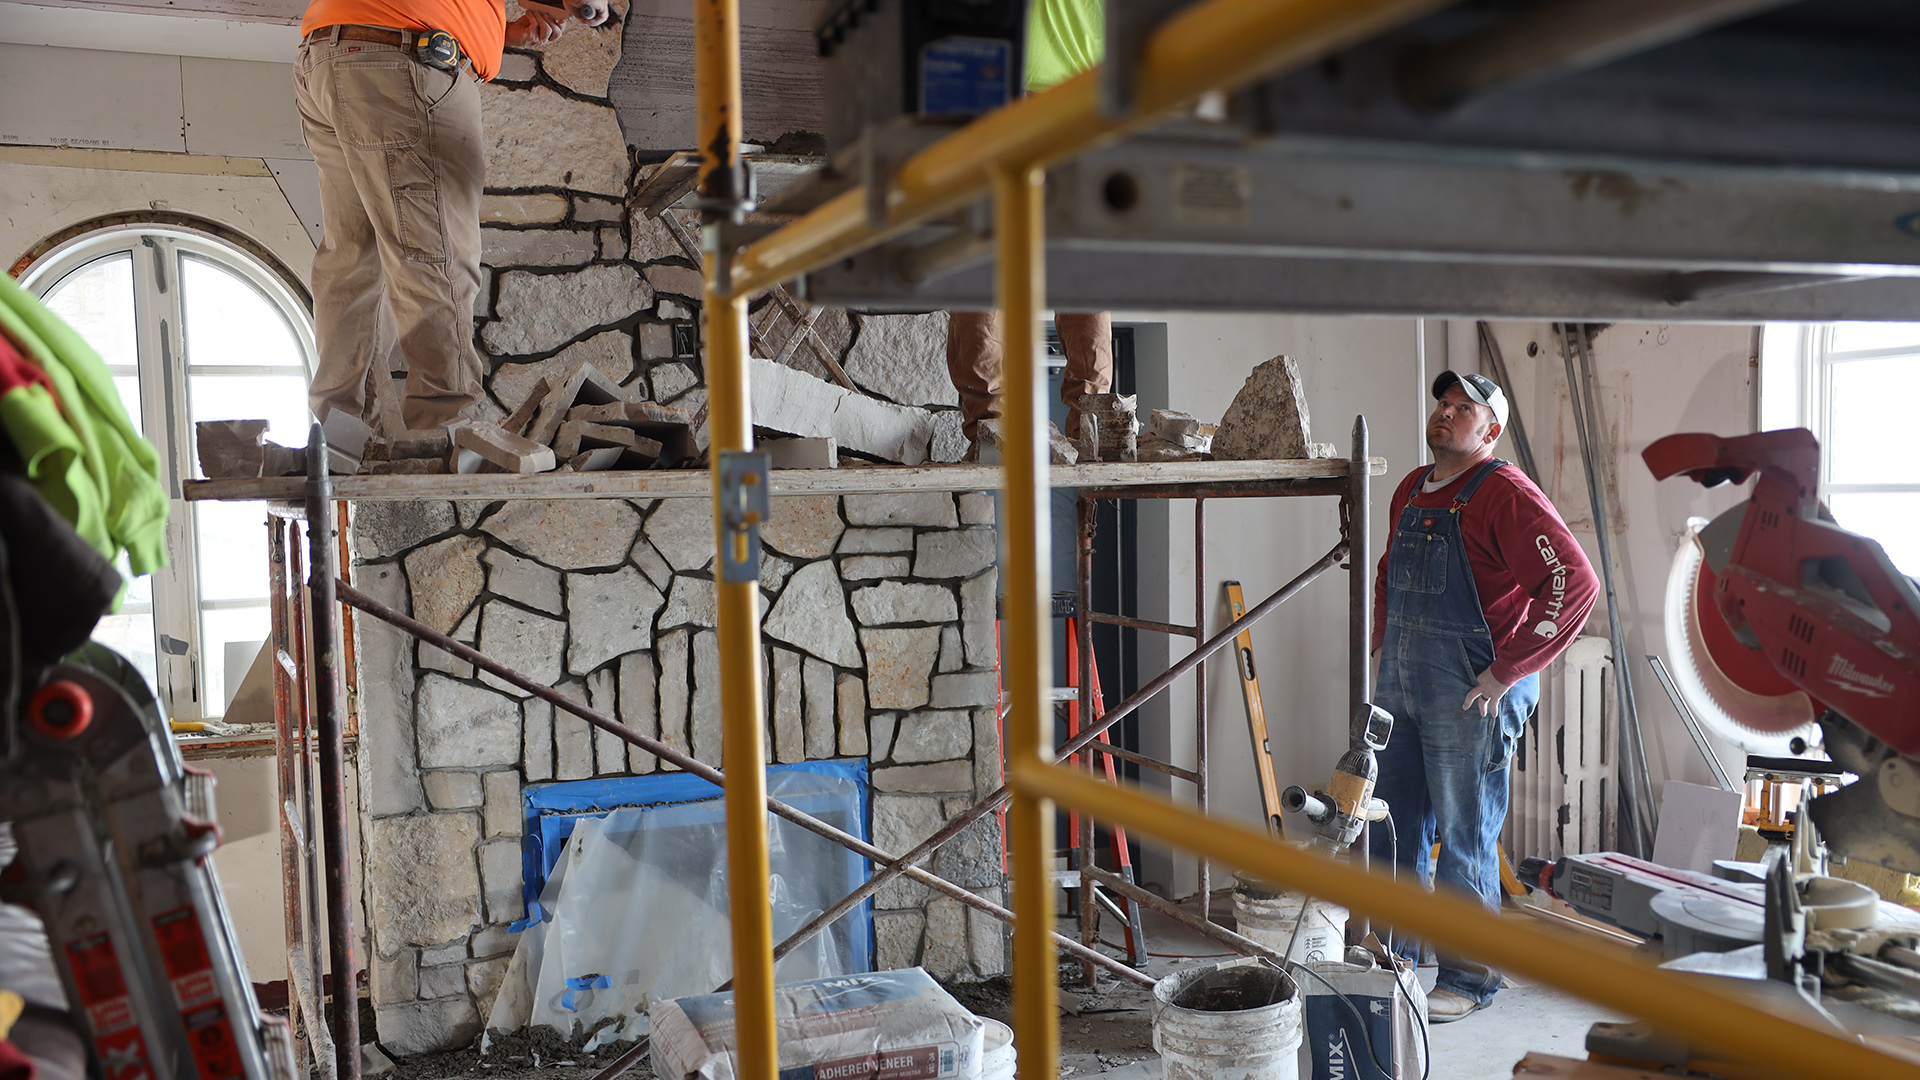 A construction worker stands atop scaffolding in front of a masonry fireplace while another worker watches while standing on the floor, with more scaffolding and other construction equipment and supplies in the room.